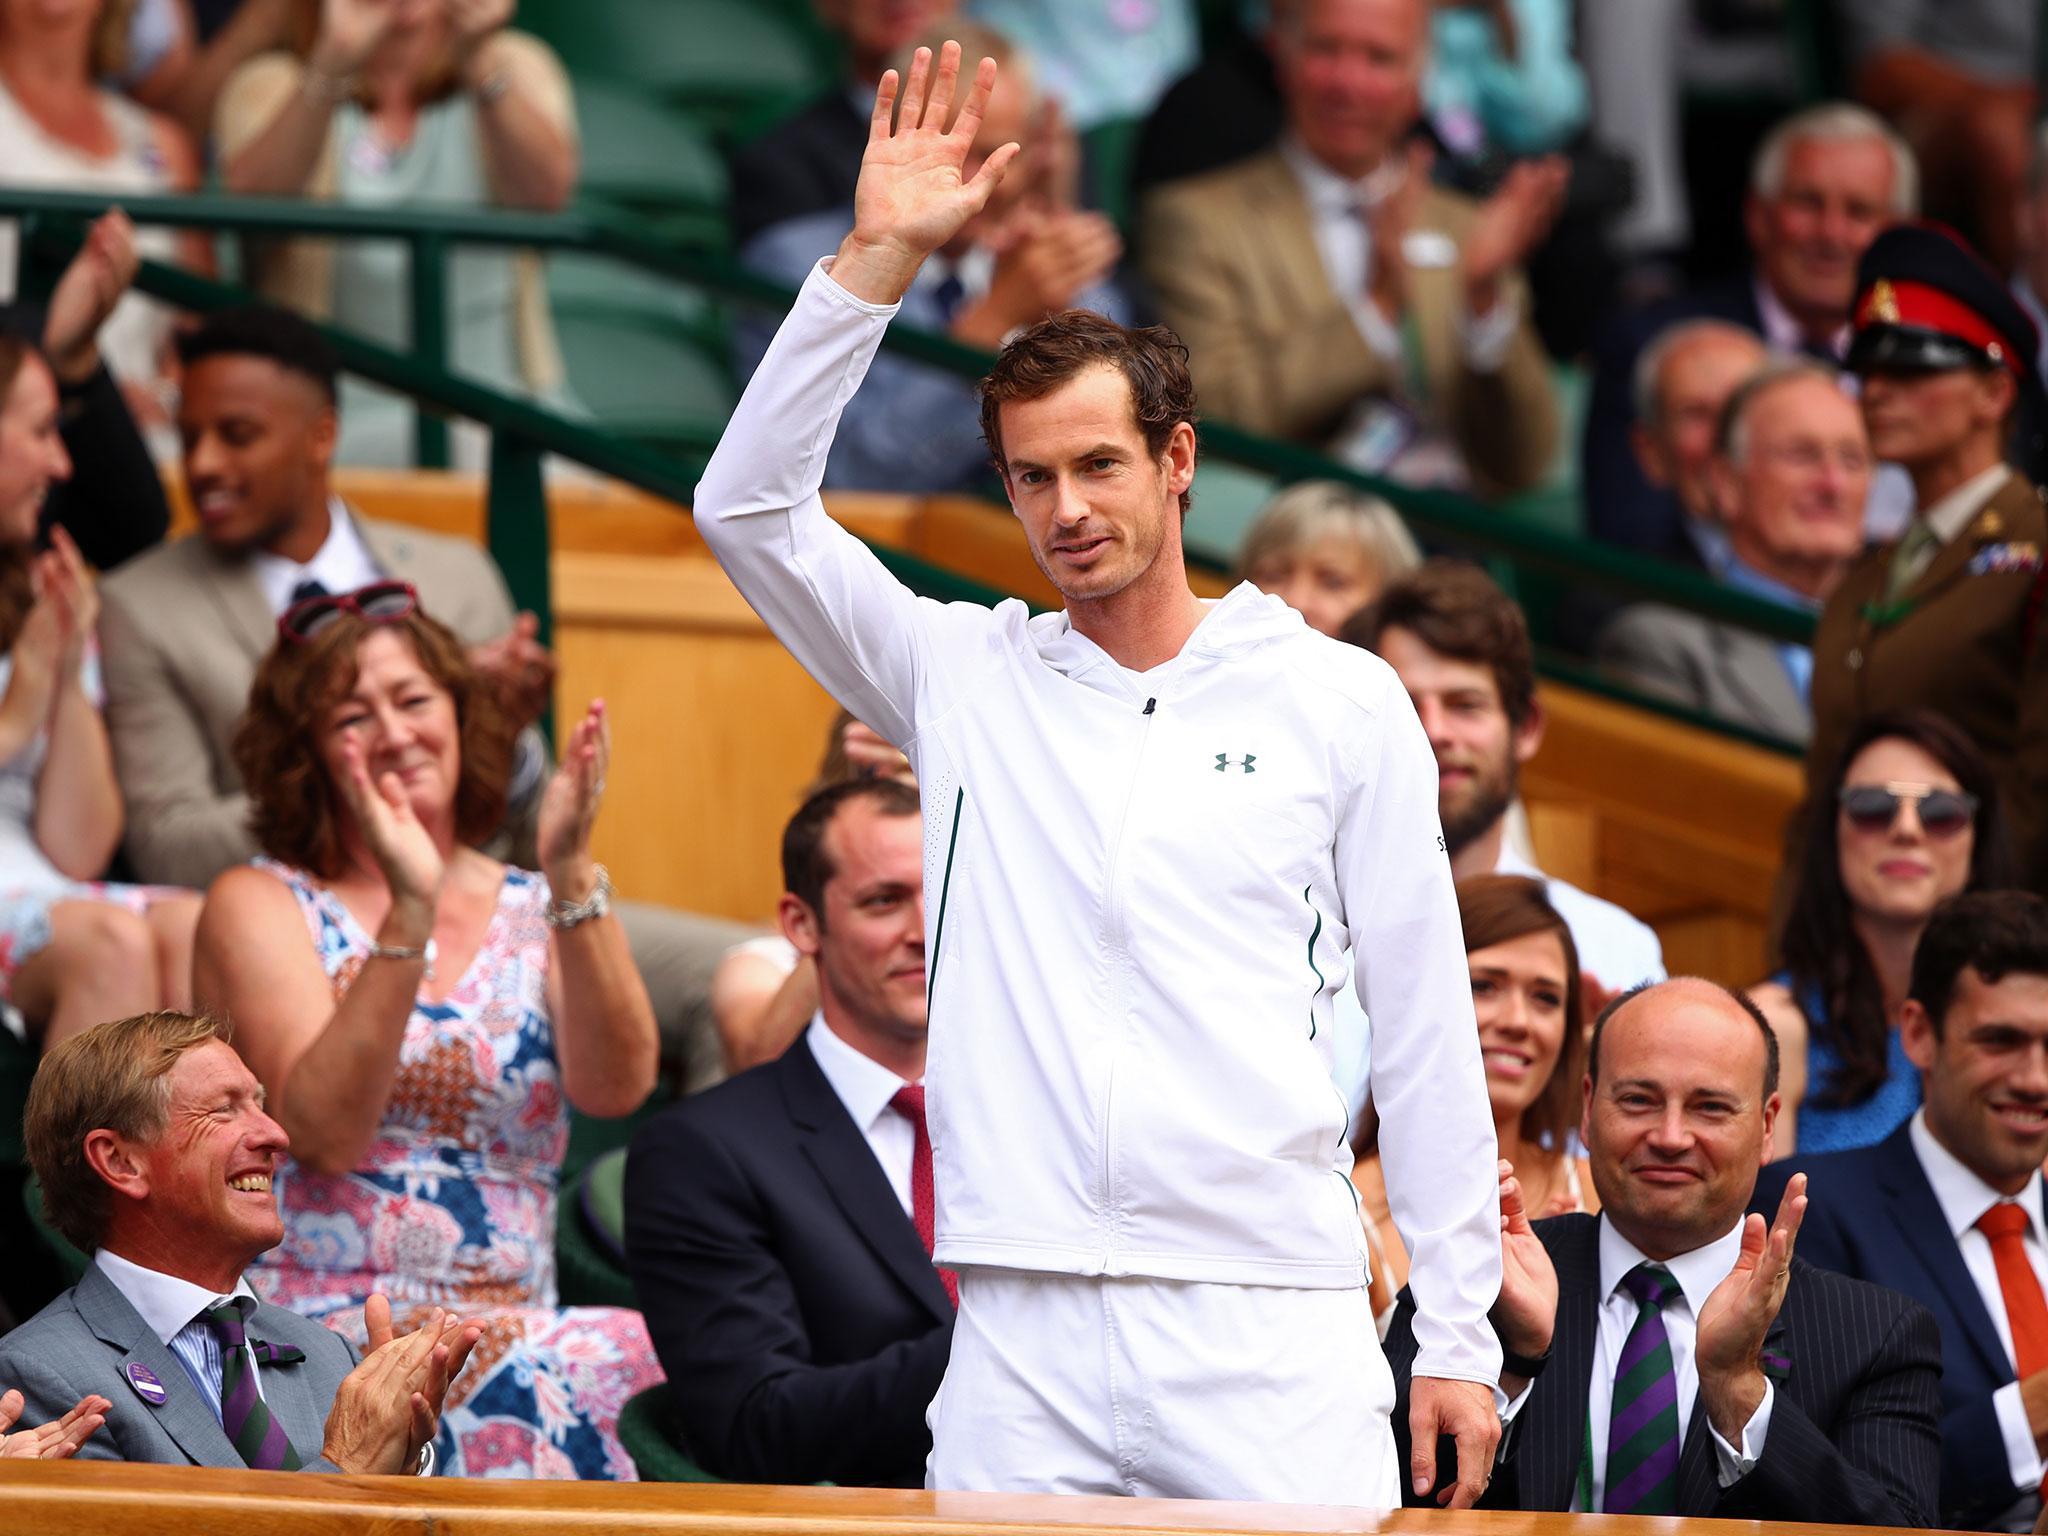 Andy Murray made a surprise appearance on Centre Court on Saturday